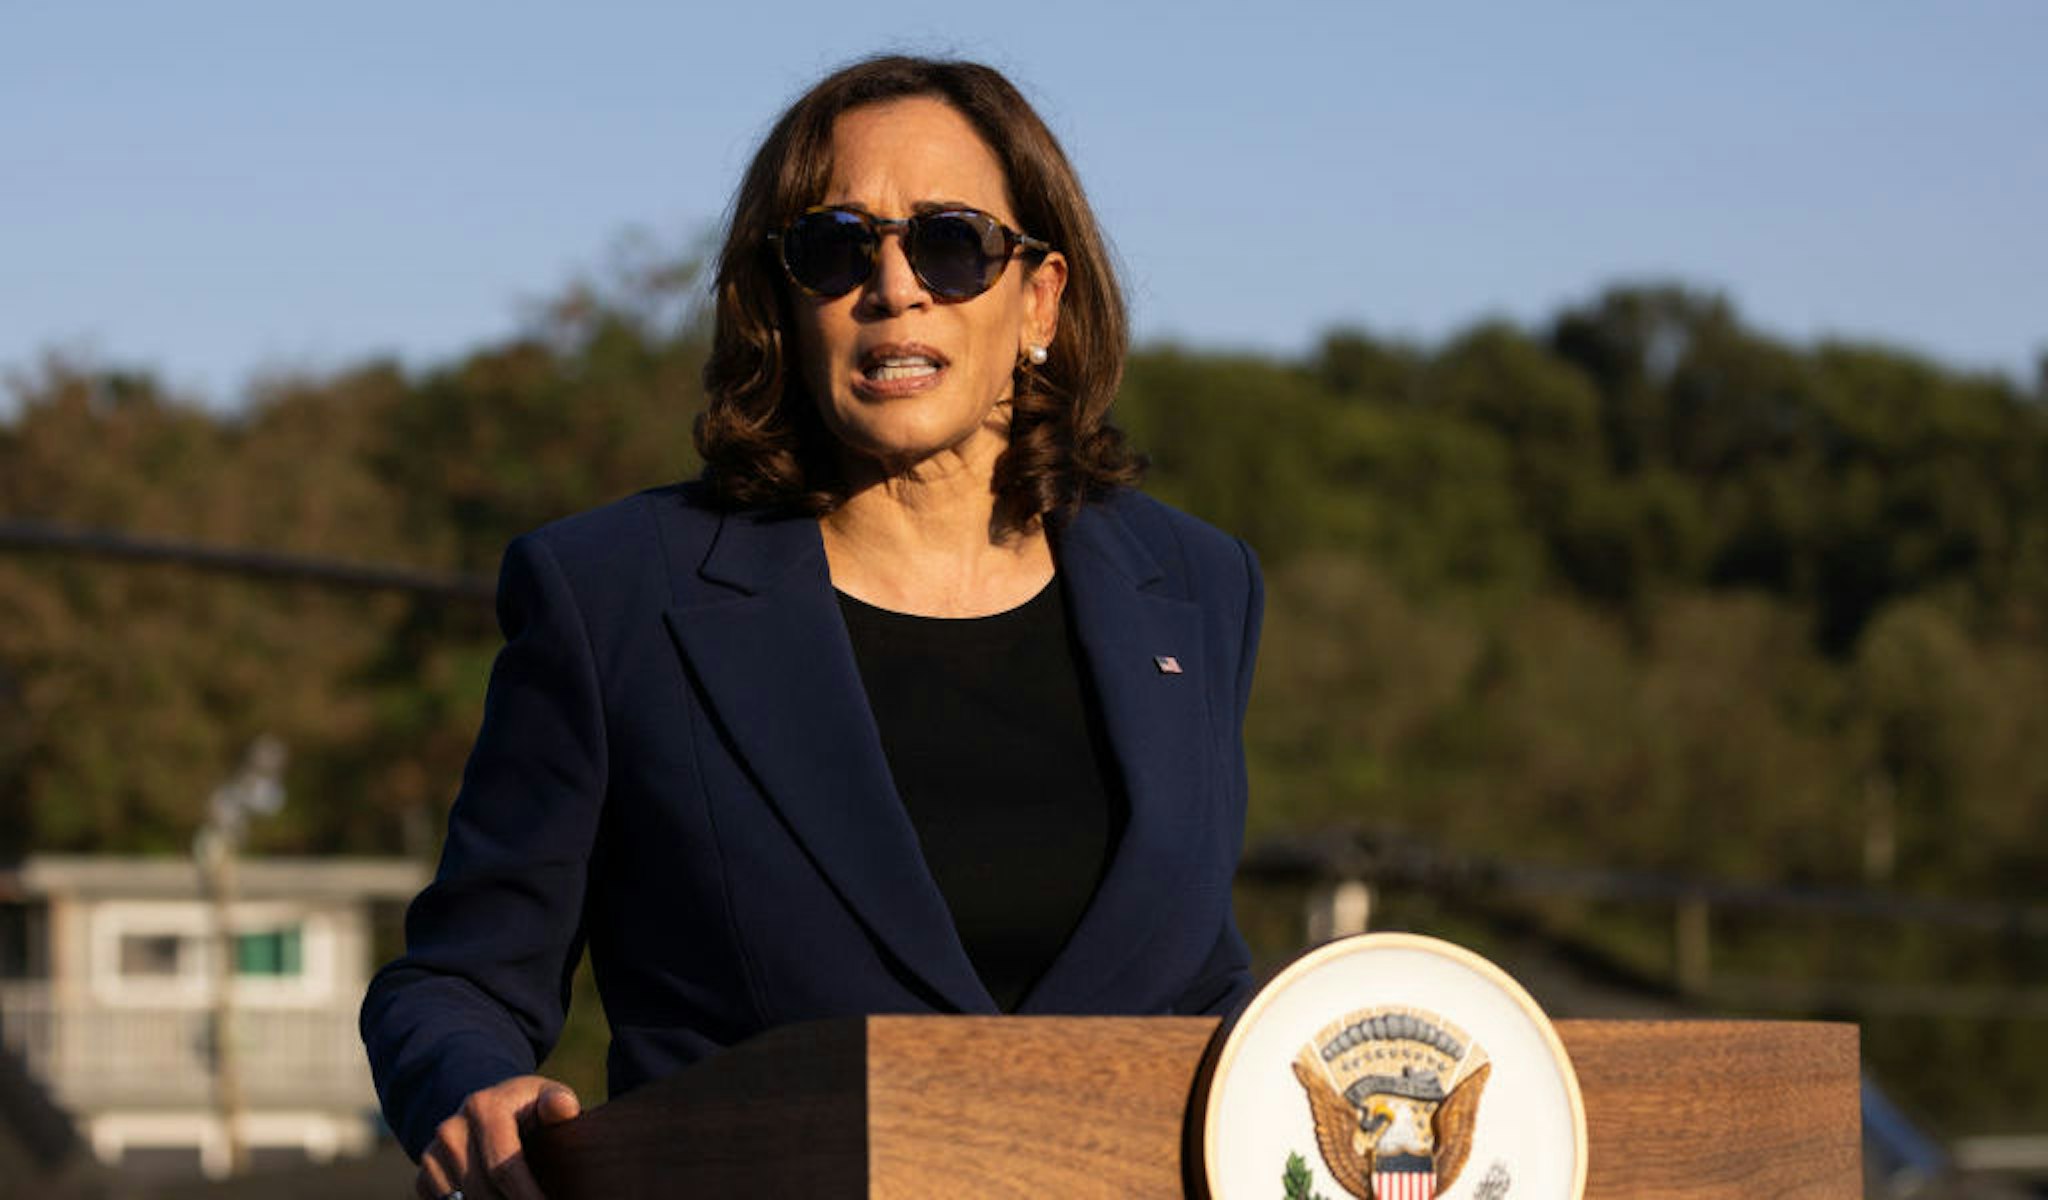 US Vice President Kamala Harris speaks during a news conference at Camp Bonifas near the truce village of Panmunjom in the Demilitarized Zone (DMZ) in Paju, South Korea, on Thursday, Sept. 29, 2022. Harris went to the Demilitarized Zone dividing the two Koreas, in a high-stakes visit for Washington that came just hours after Kim Jong Un’s regime fired two short-range ballistic missiles into the sea. Photographer: SeongJoon Cho/Bloomberg